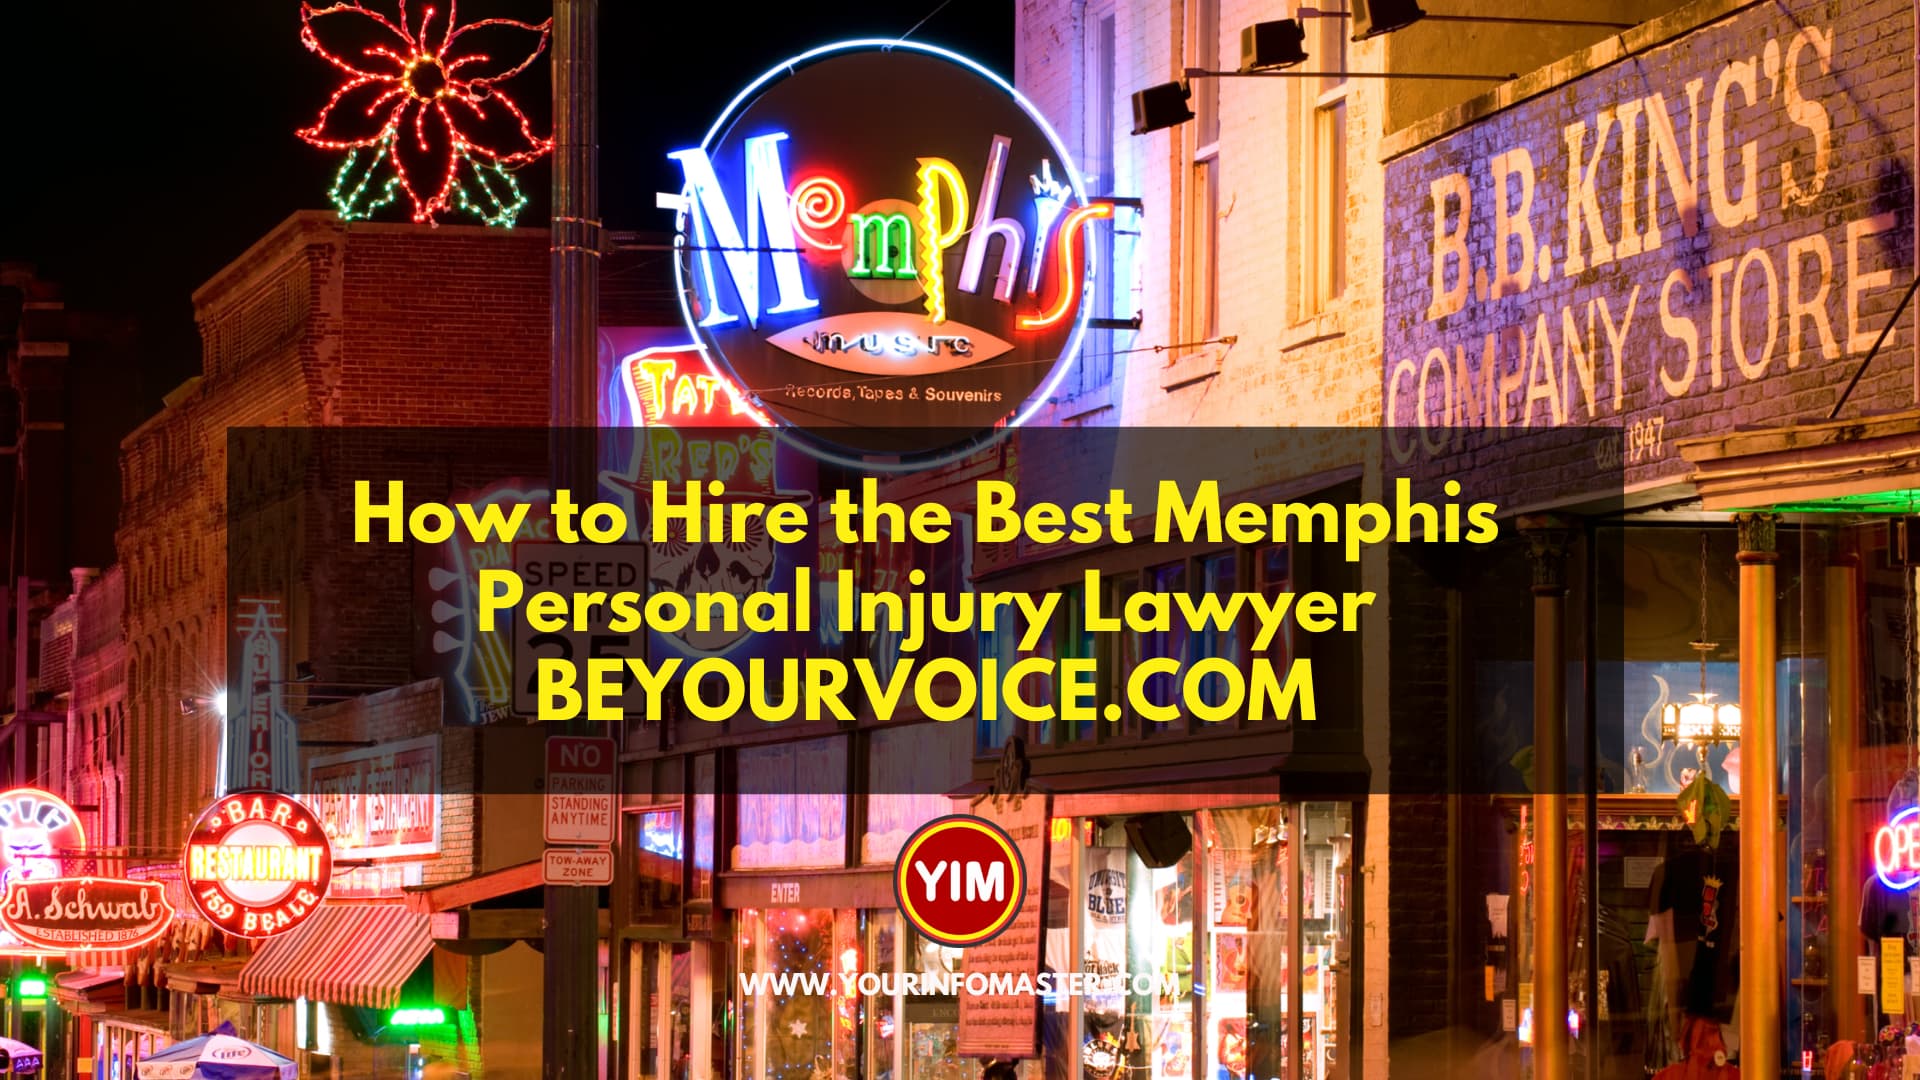 How to Hire the Best Memphis Personal Injury Lawyer BEYOURVOICE.COM